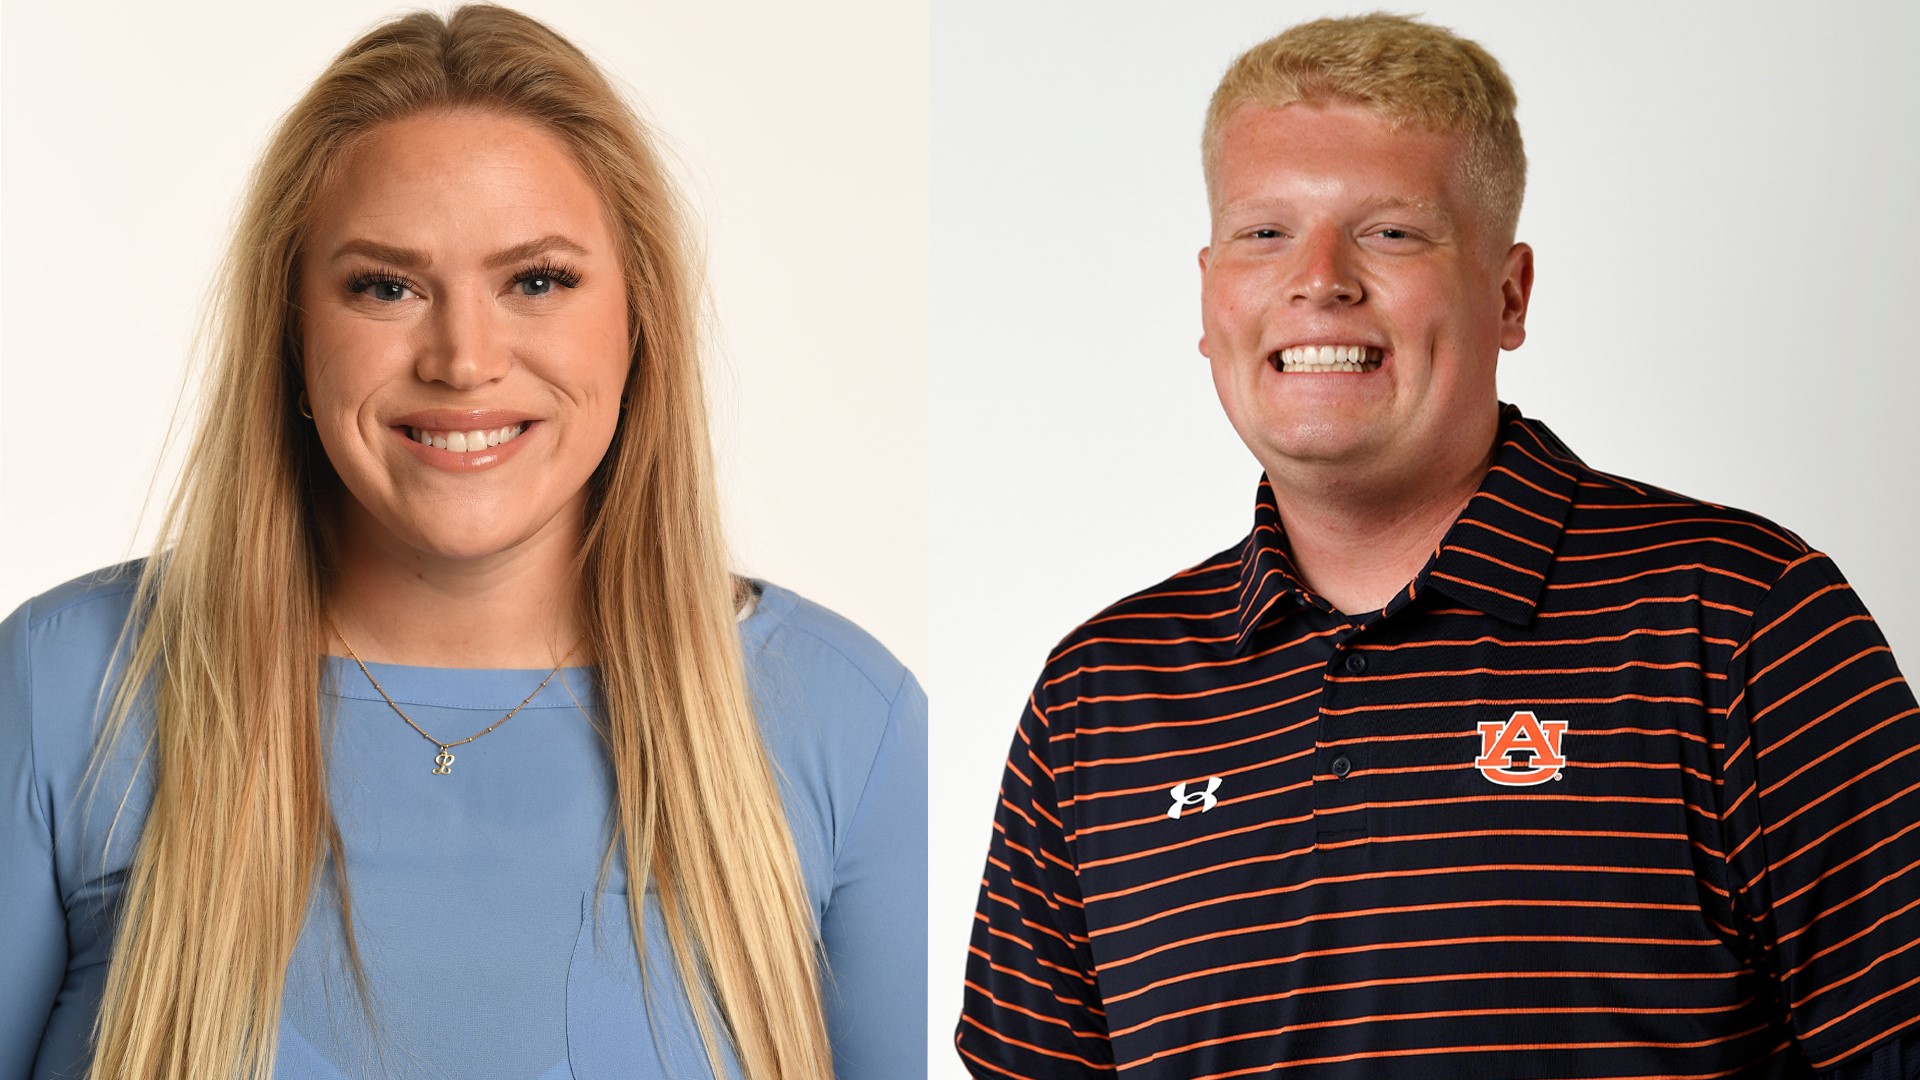 While in town for the SEC softball tournament, Lora Fuhrmann and Noah Tanner intervened during a medical emergency at Northwest Arkansas National Airport.